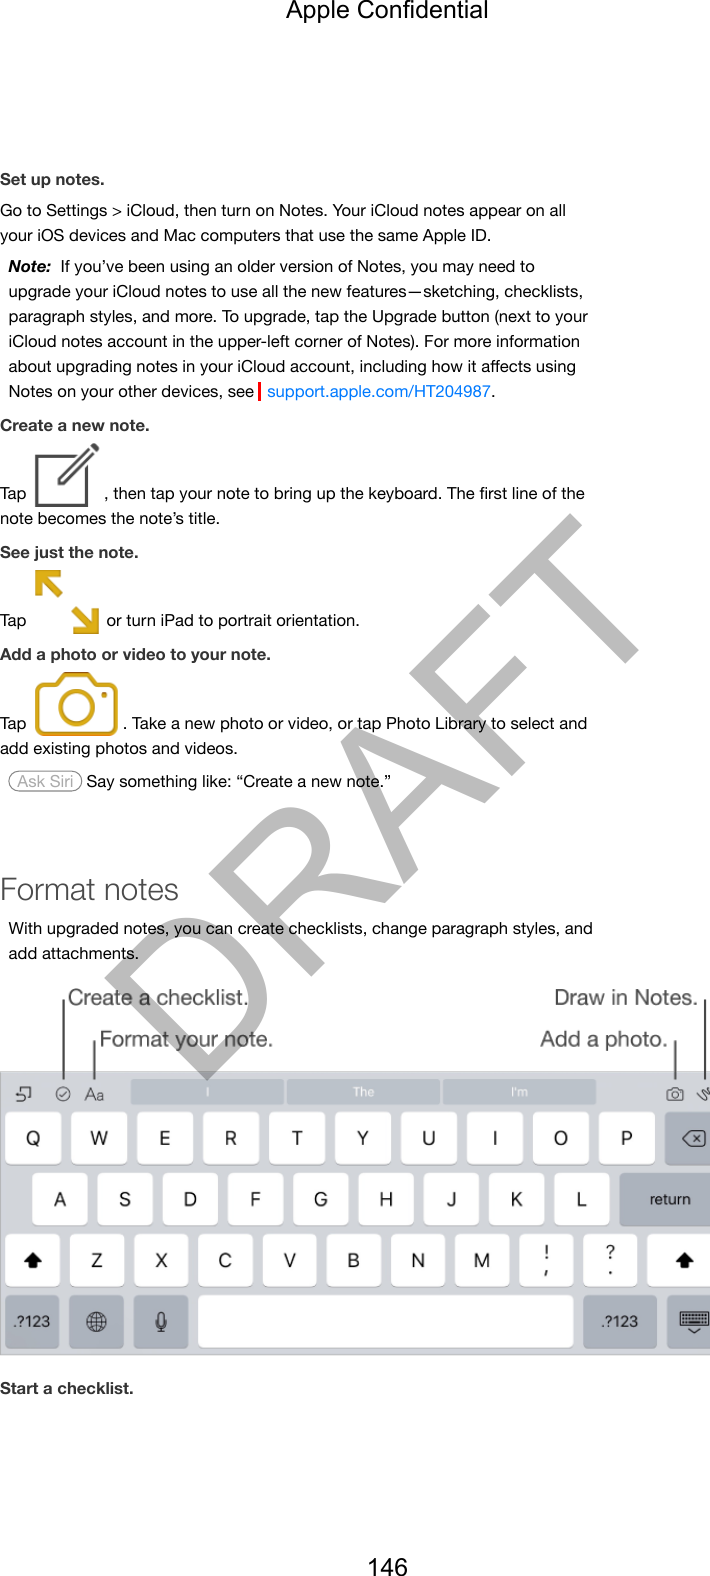 Set up notes.Go to Settings &gt; iCloud, then turn on Notes. Your iCloud notes appear on allyour iOS devices and Mac computers that use the same Apple ID.Note:  If you’ve been using an older version of Notes, you may need toupgrade your iCloud notes to use all the new features—sketching, checklists,paragraph styles, and more. To upgrade, tap the Upgrade button (next to youriCloud notes account in the upper-left corner of Notes). For more informationabout upgrading notes in your iCloud account, including how it aﬀects usingNotes on your other devices, see  support.apple.com/HT204987.Create a new note.Tap  , then tap your note to bring up the keyboard. The ﬁrst line of thenote becomes the note’s title.See just the note.Tap   or turn iPad to portrait orientation.Add a photo or video to your note.Tap  . Take a new photo or video, or tap Photo Library to select andadd existing photos and videos. Ask Siri  Say something like: “Create a new note.”Format notesWith upgraded notes, you can create checklists, change paragraph styles, andadd attachments.Start a checklist.Apple Confidential146DRAFT